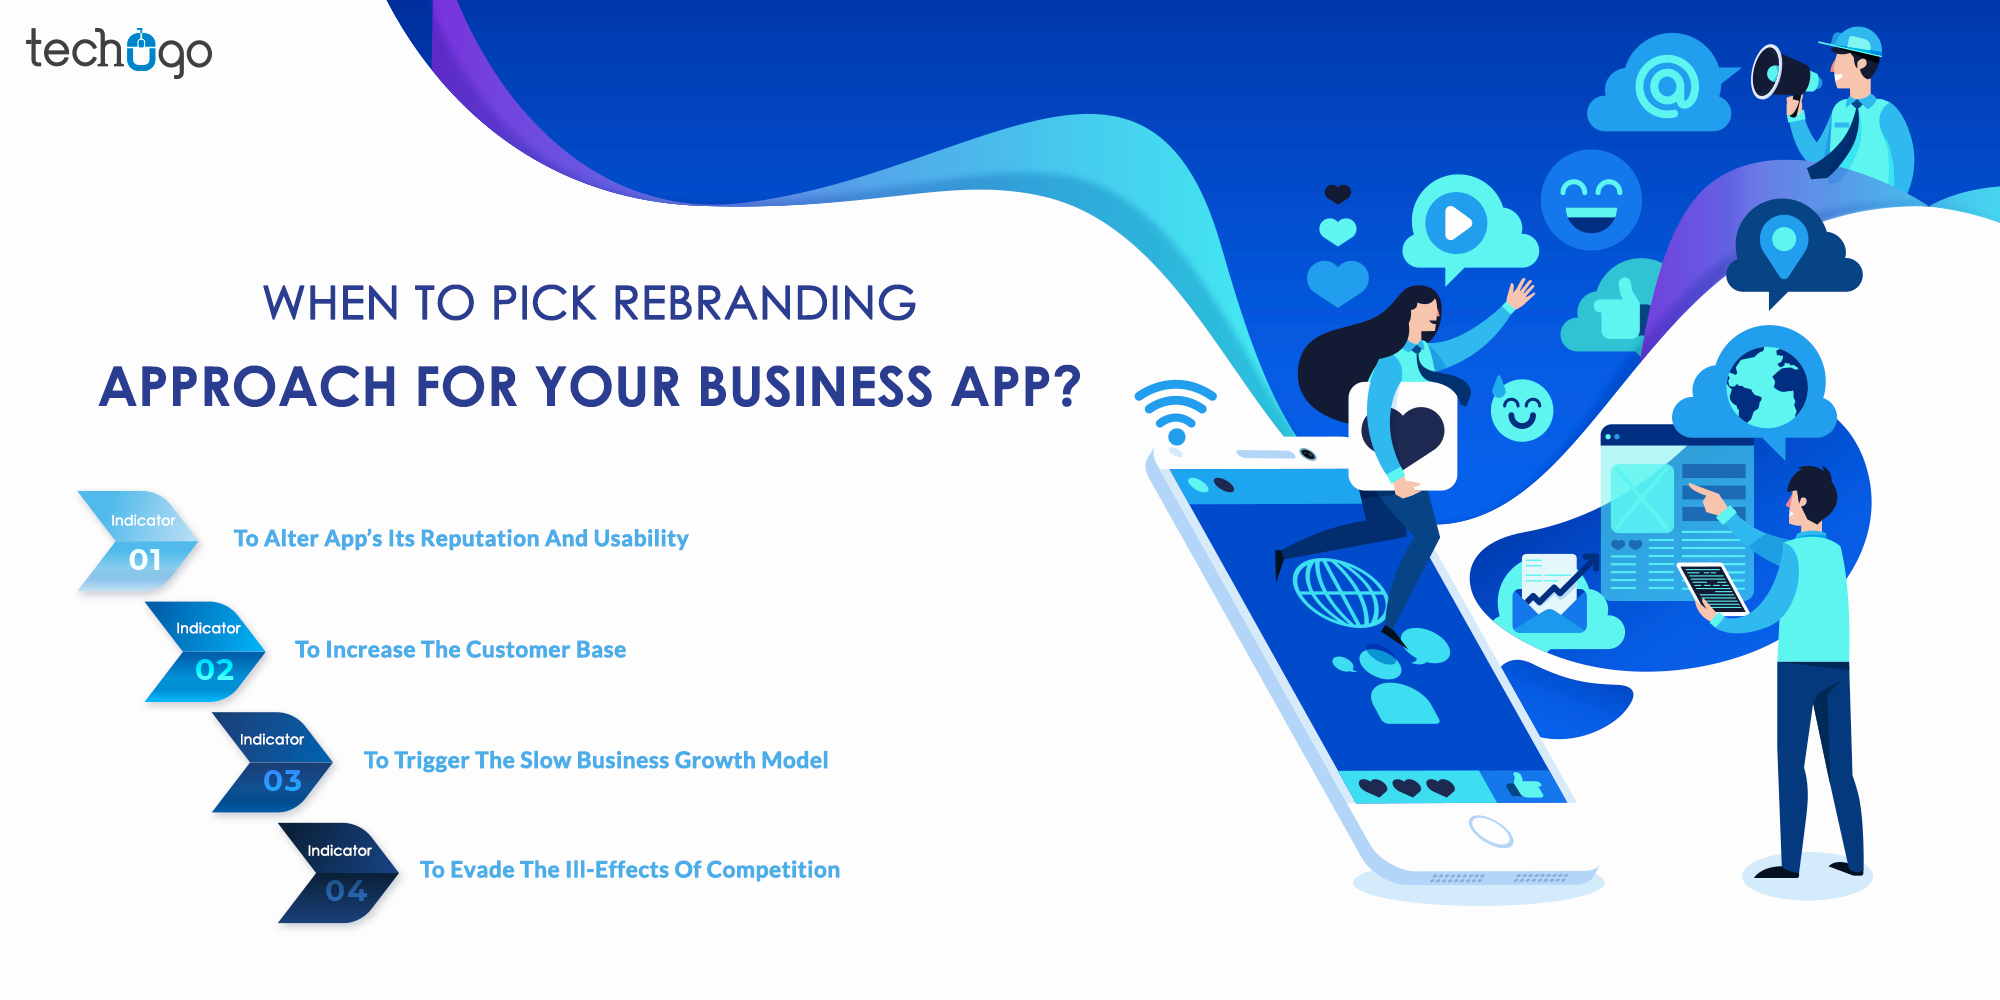 When To Pick Rebranding Approach For Your Business App?